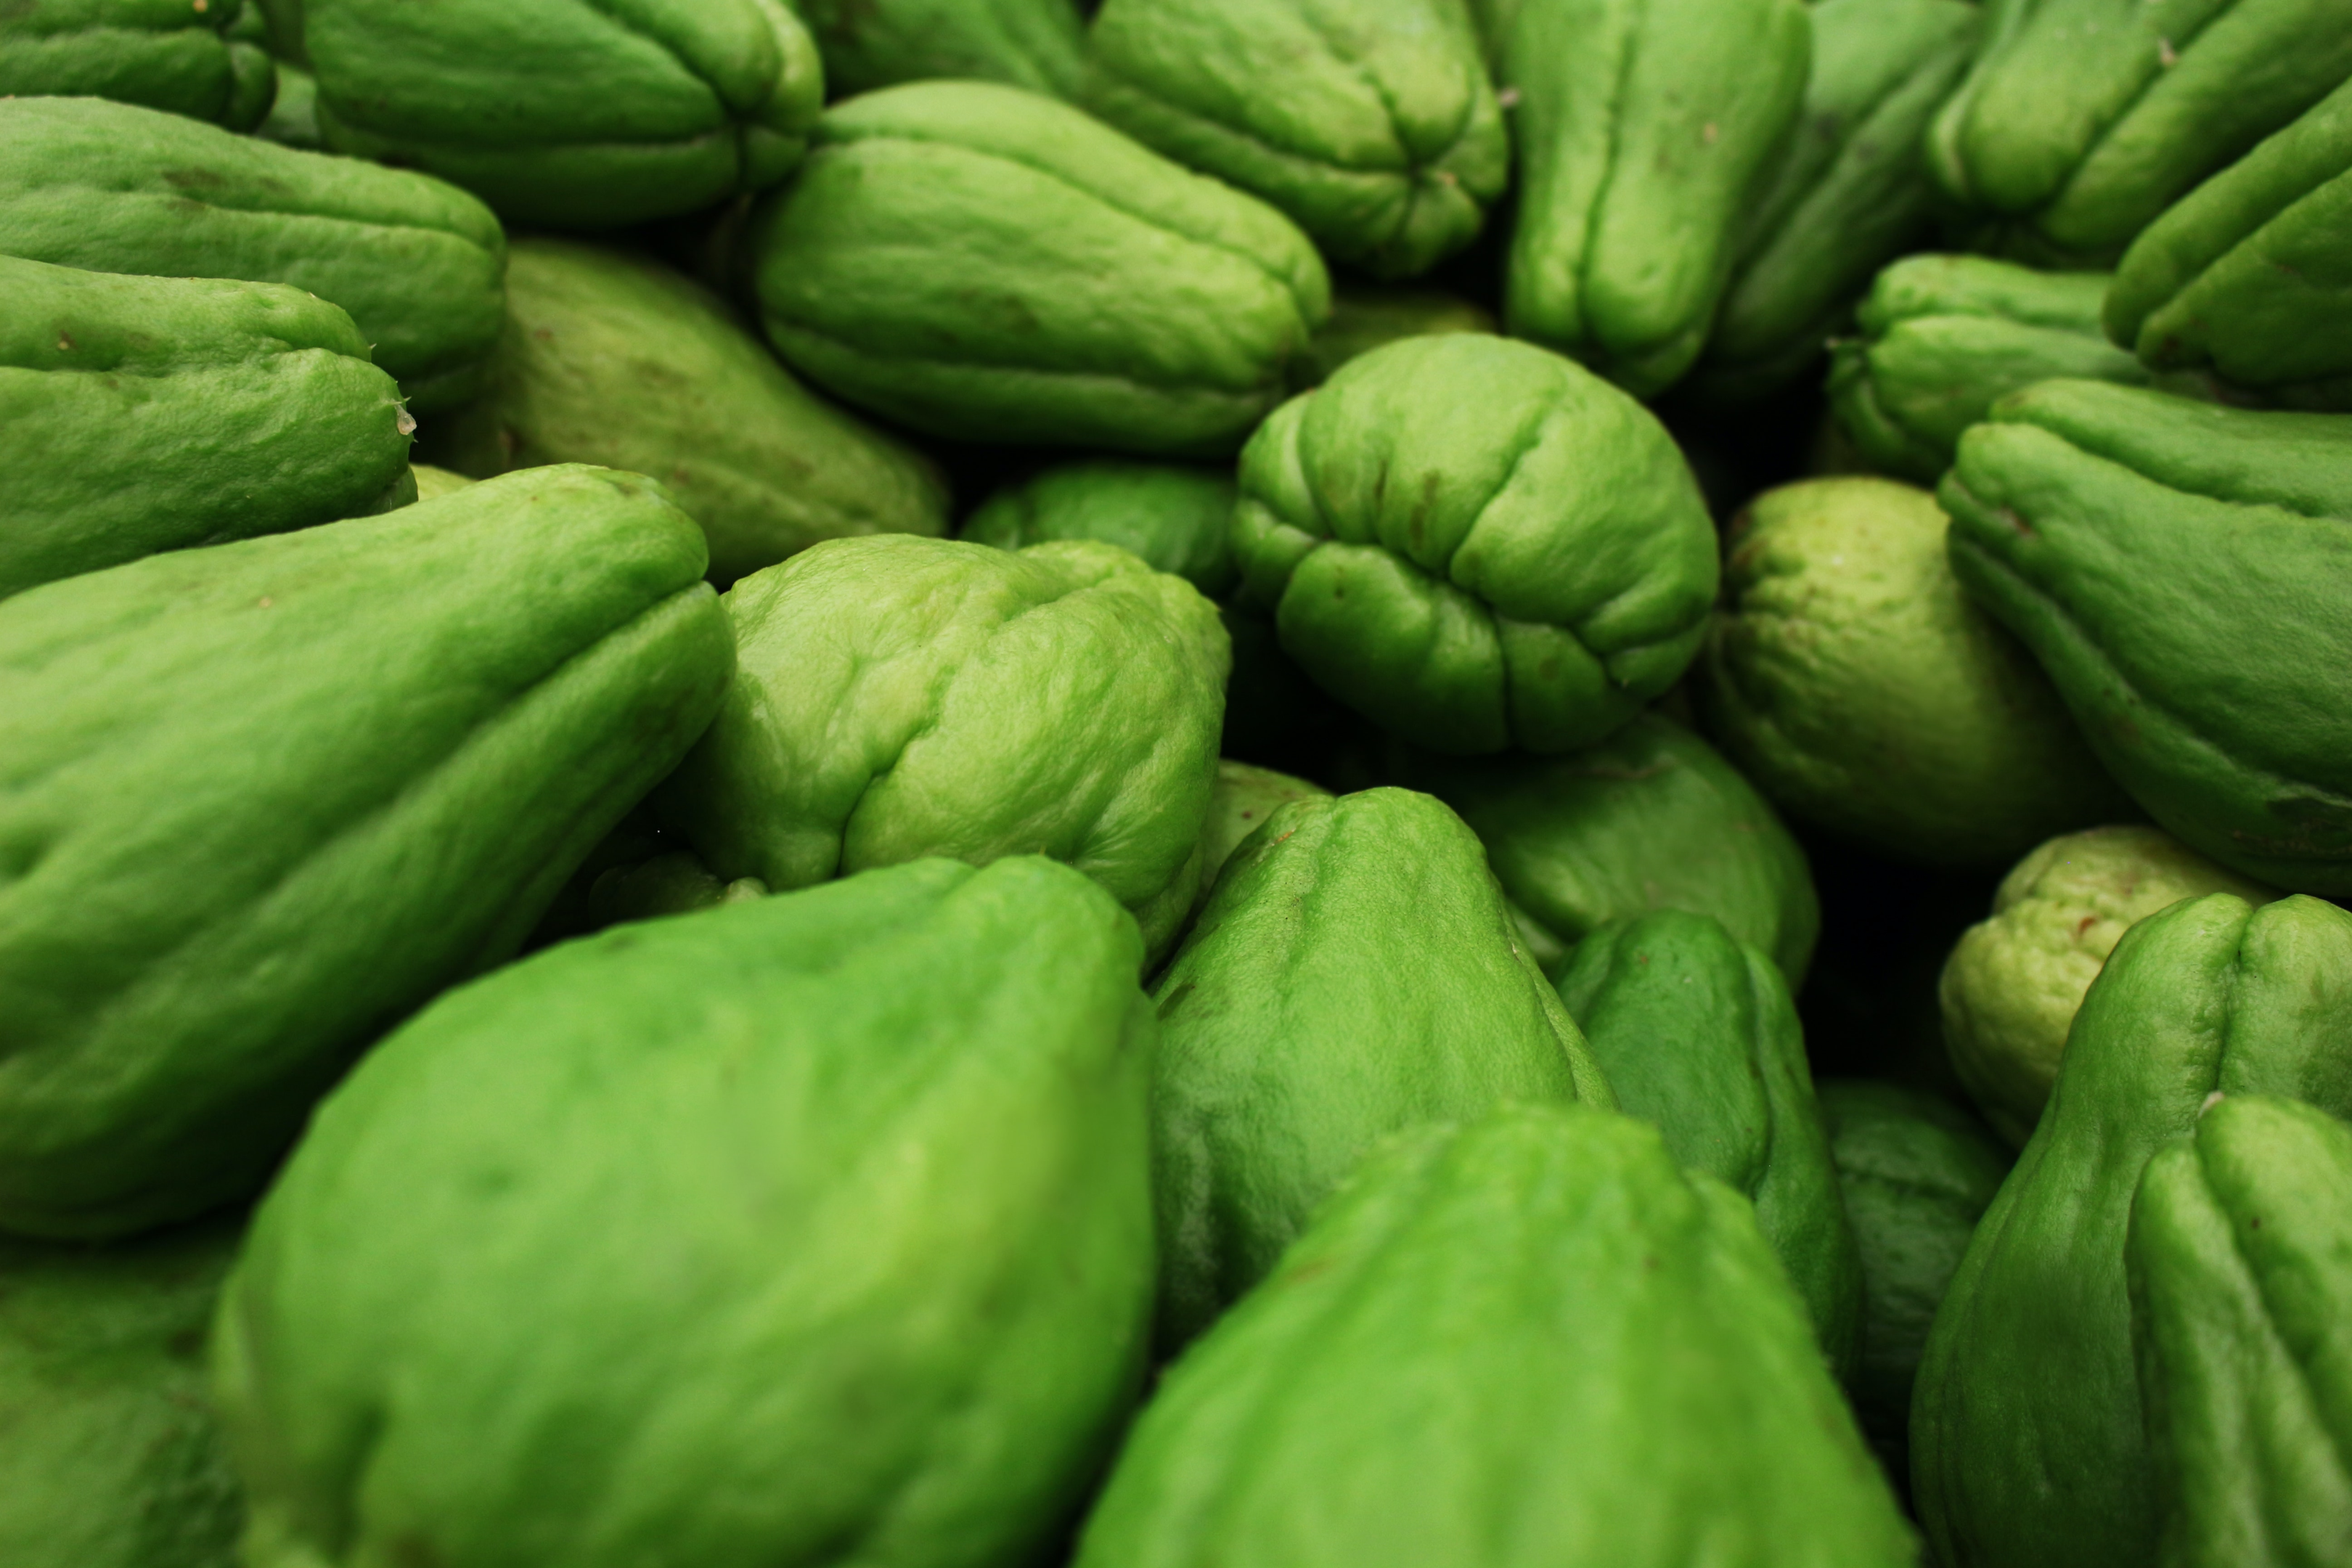 An assortment of fresh chayote, showcasing the unique vegetable in abundance and ready for various culinary uses